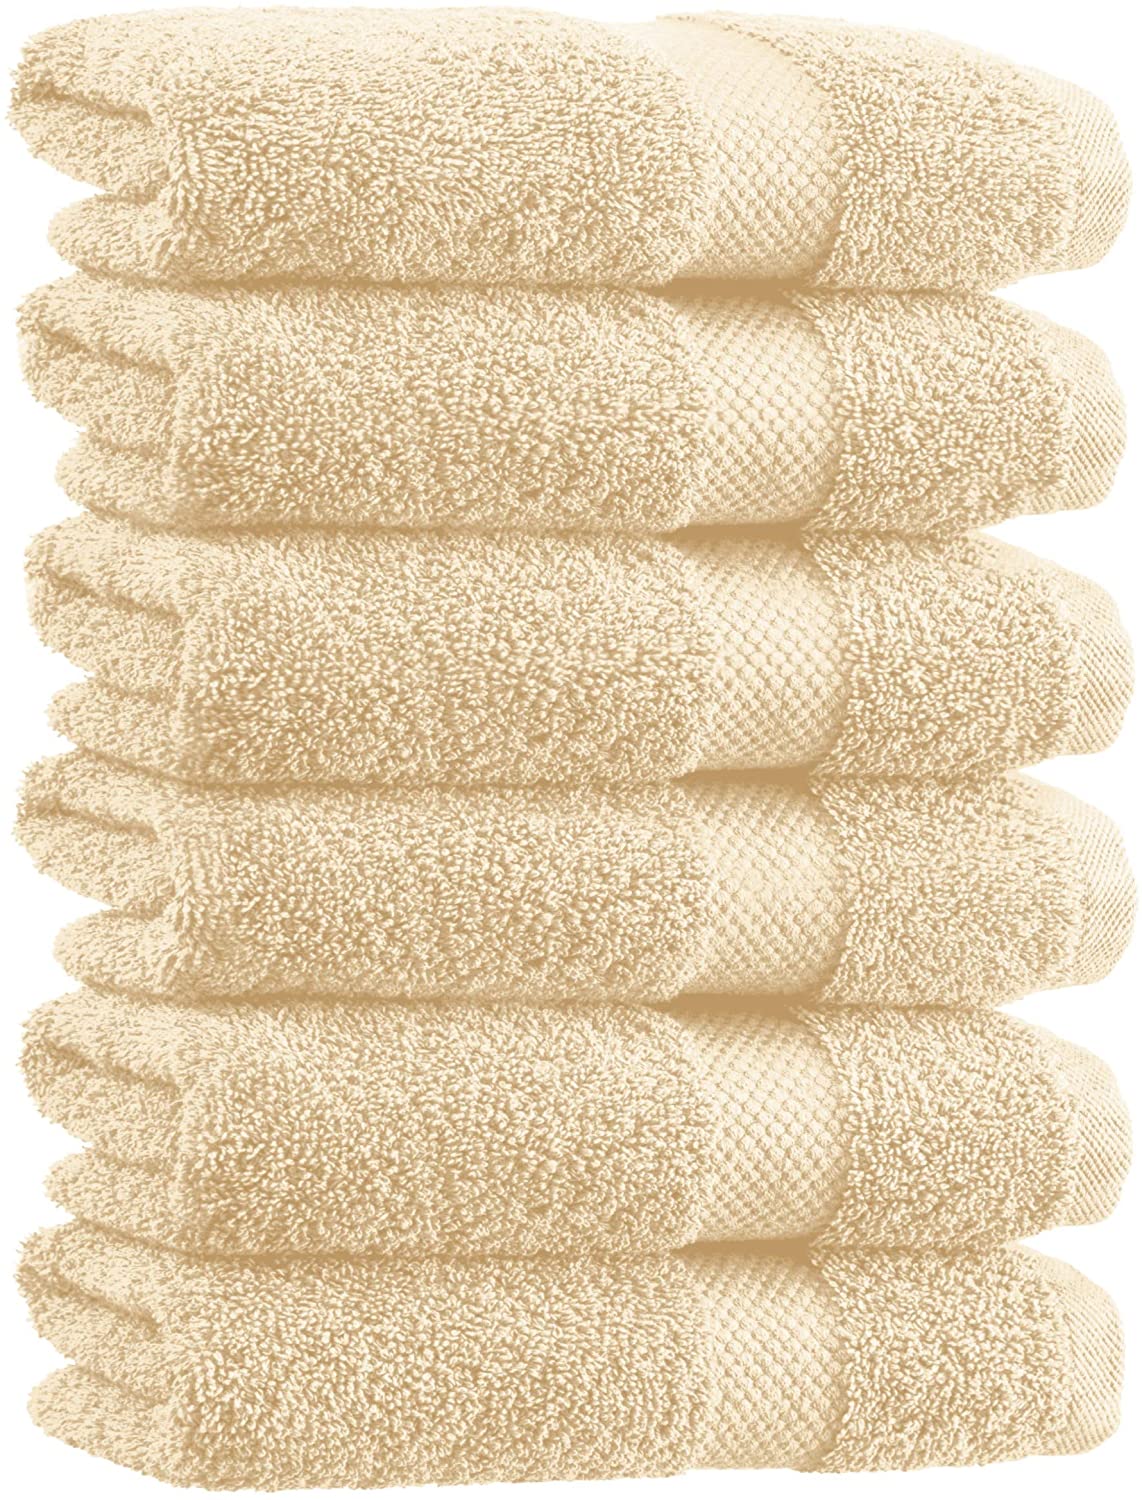 Soft Circlet Egyptian CottonHighly Absorbent Hotel Luxury White Hand Towels 